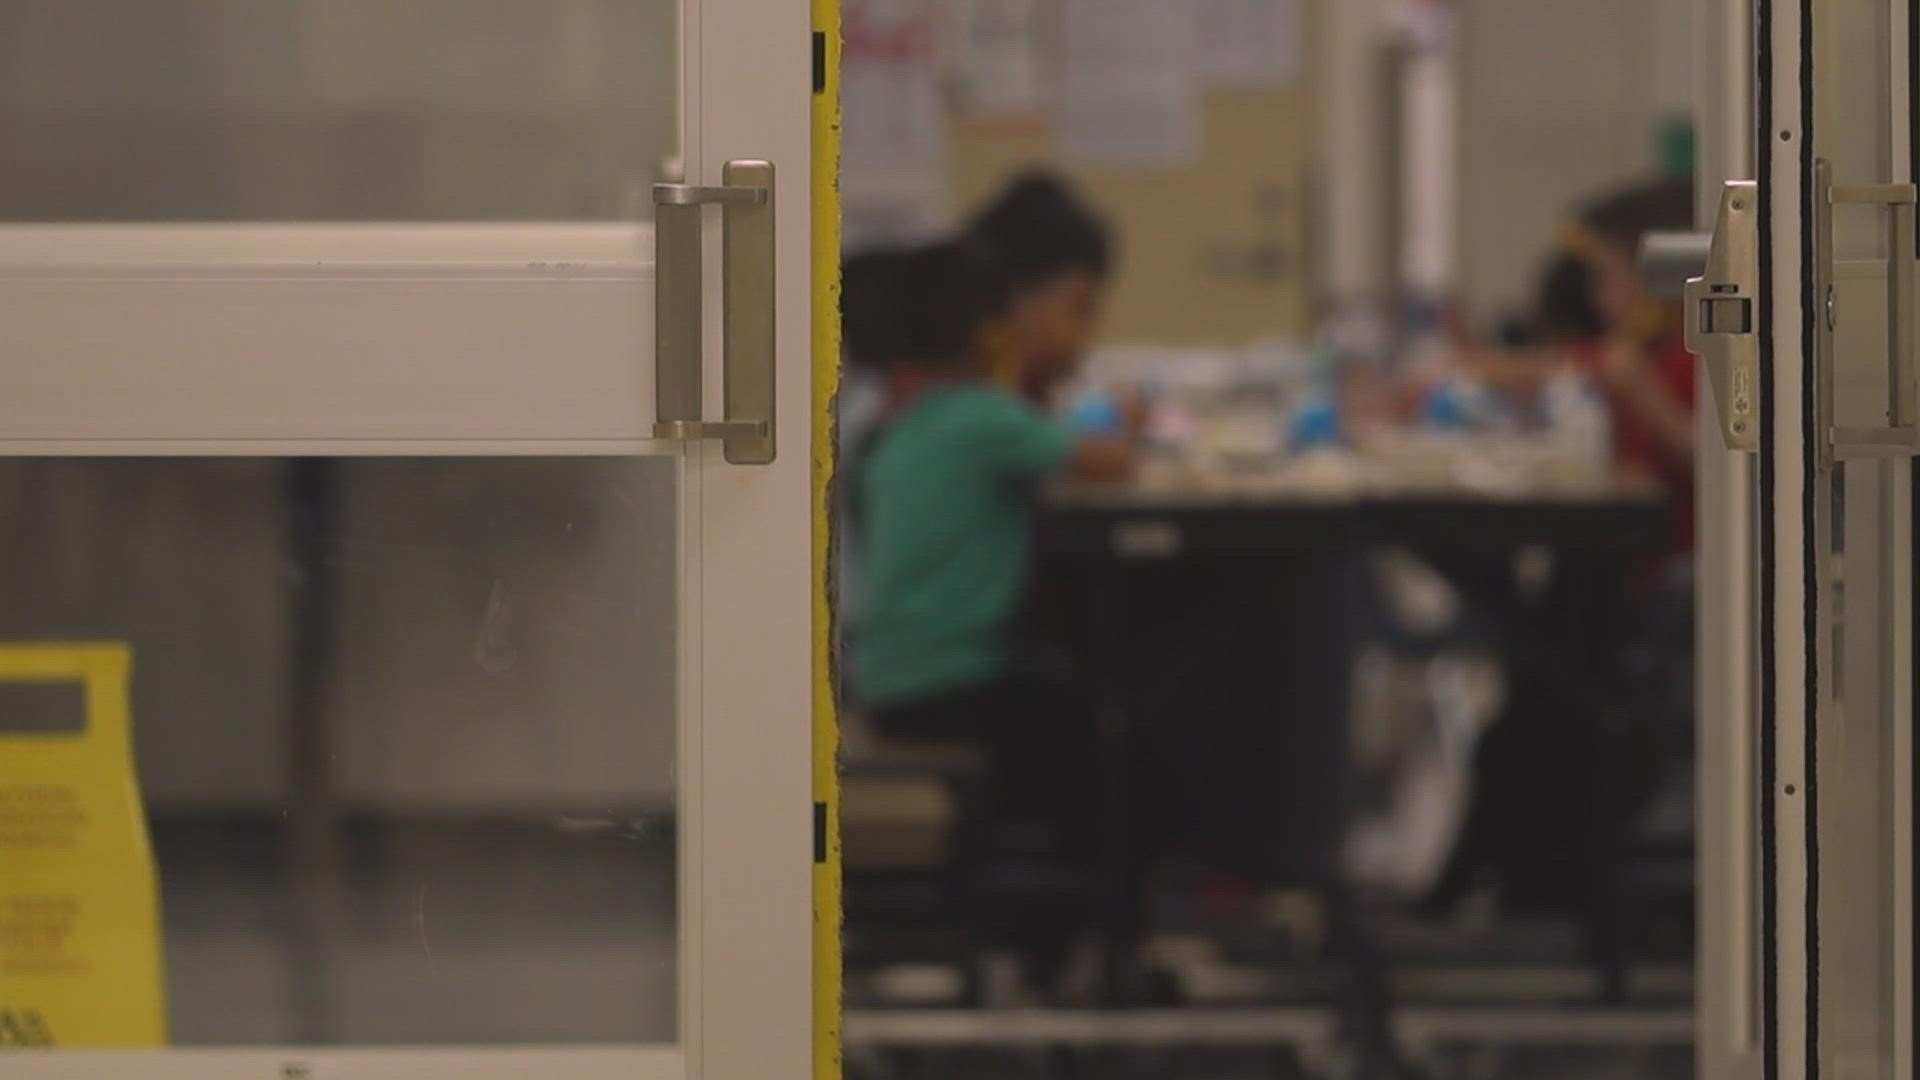 Commissioner Mike Morath oversees public education in Texas. He talked to WFAA about the series of issues schools have faced -- from COVID to staffing problems.